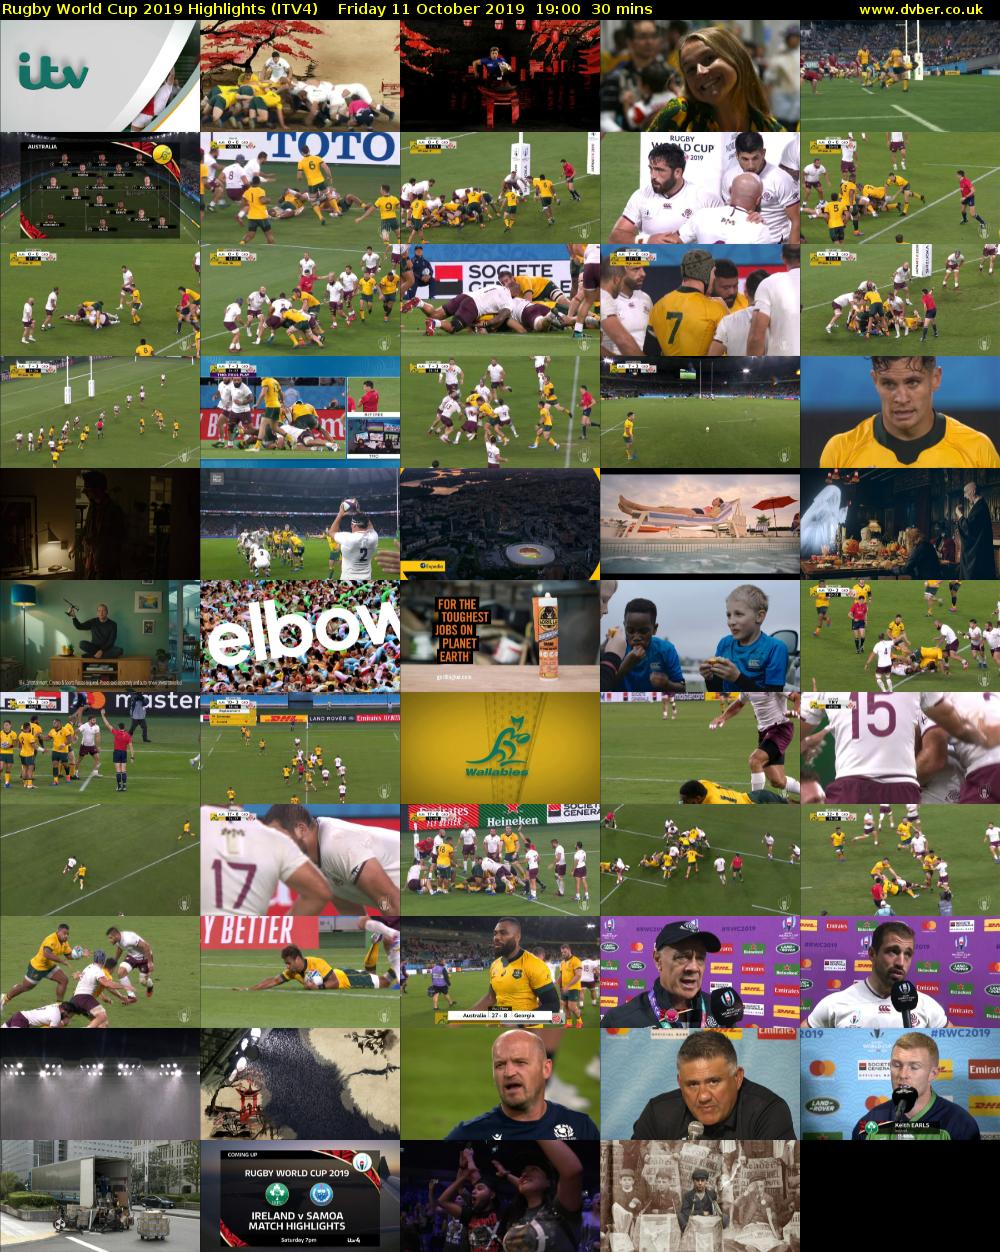 Rugby World Cup 2019 Highlights (ITV4) Friday 11 October 2019 19:00 - 19:30